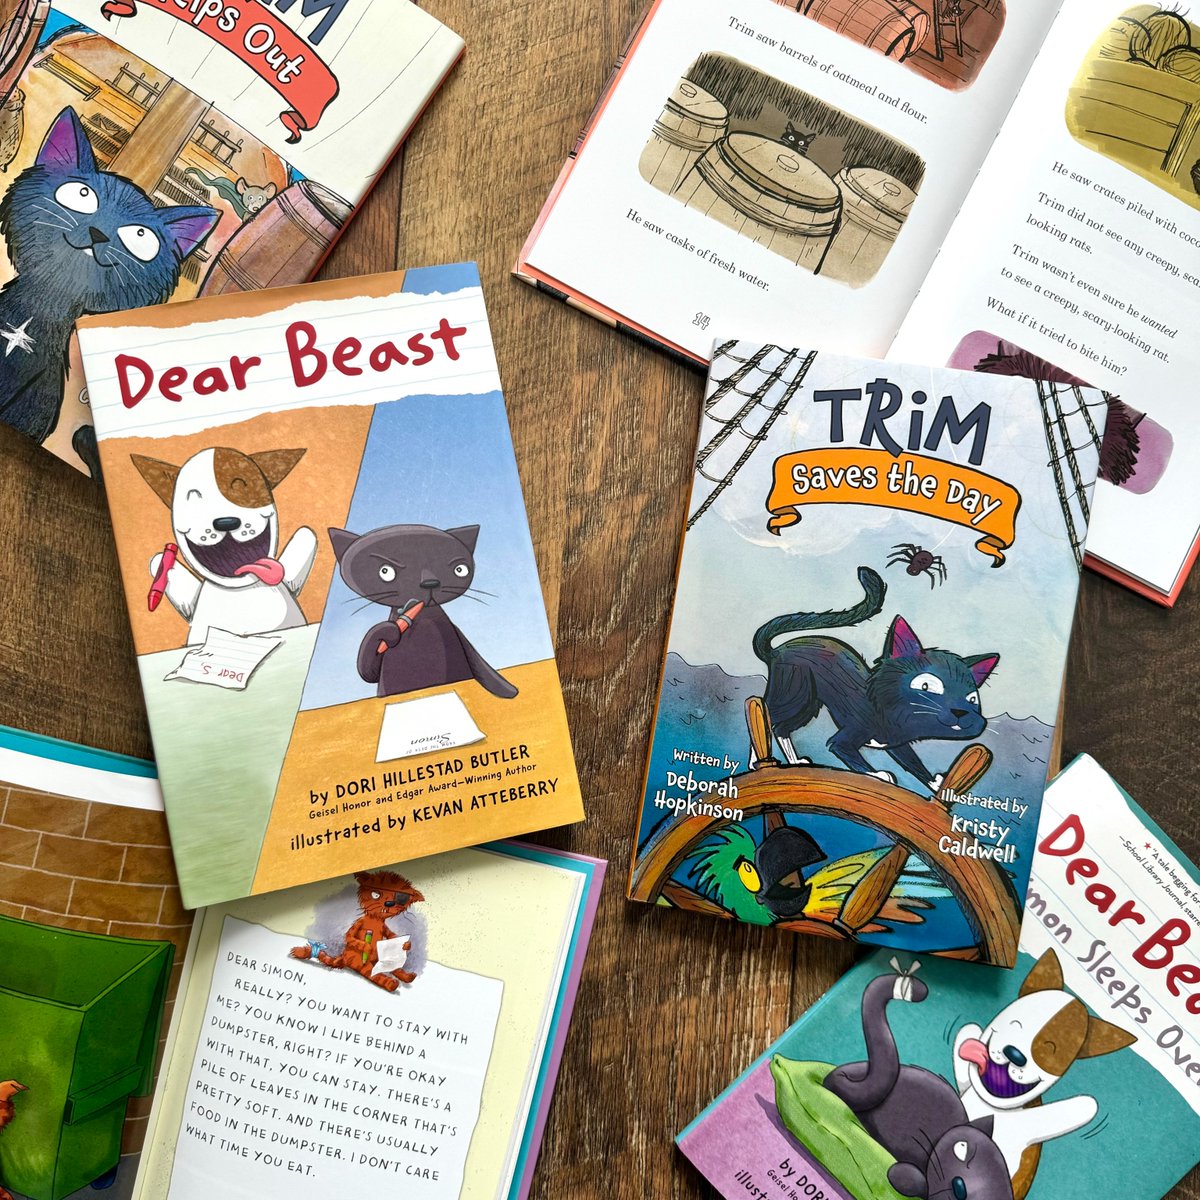 Do you have a young reader in your life who loves cats? Be sure to add cat-tastic illustrated chapter books like the Dear Beast and the Adventures of Trim series to their library! @Deborahopkinson #chapterbooks holidayhouse.com/book/dear-beas… peachtreebooks.com/book/trim-sets…